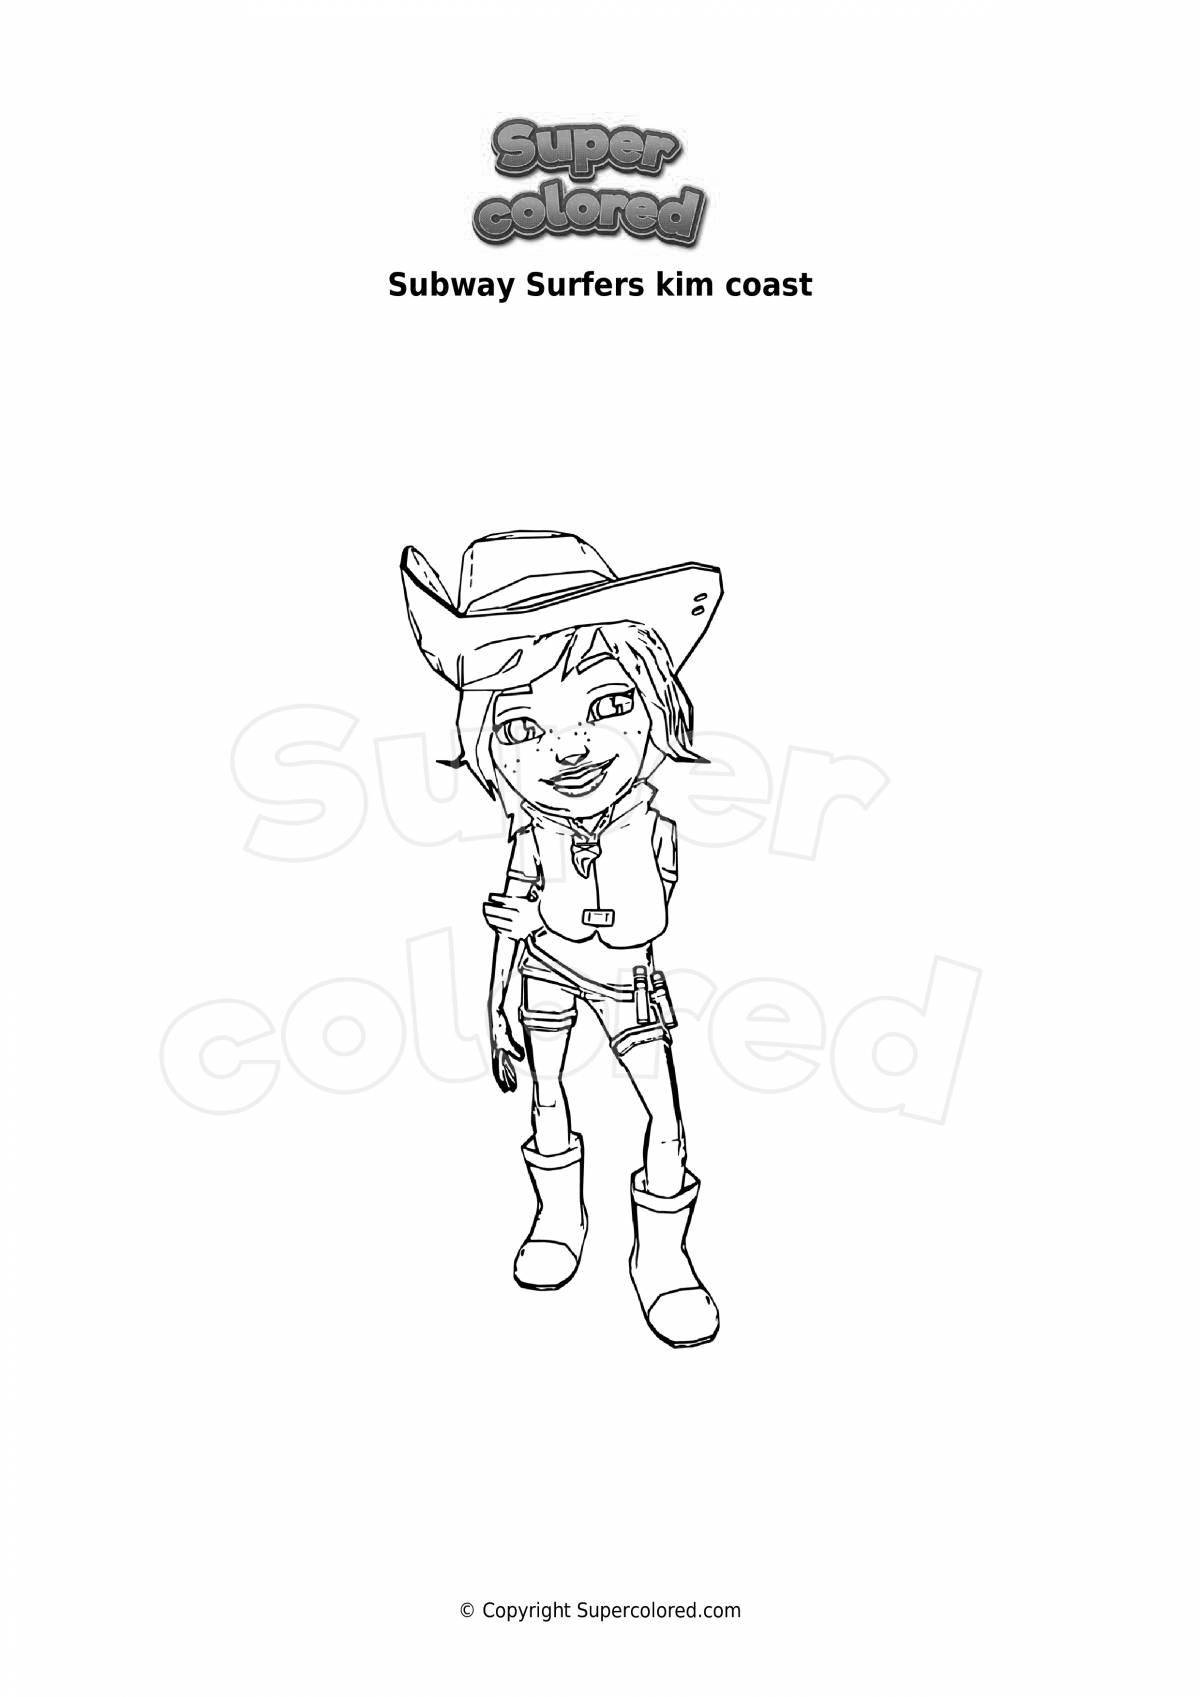 Charming subway surfers coloring book